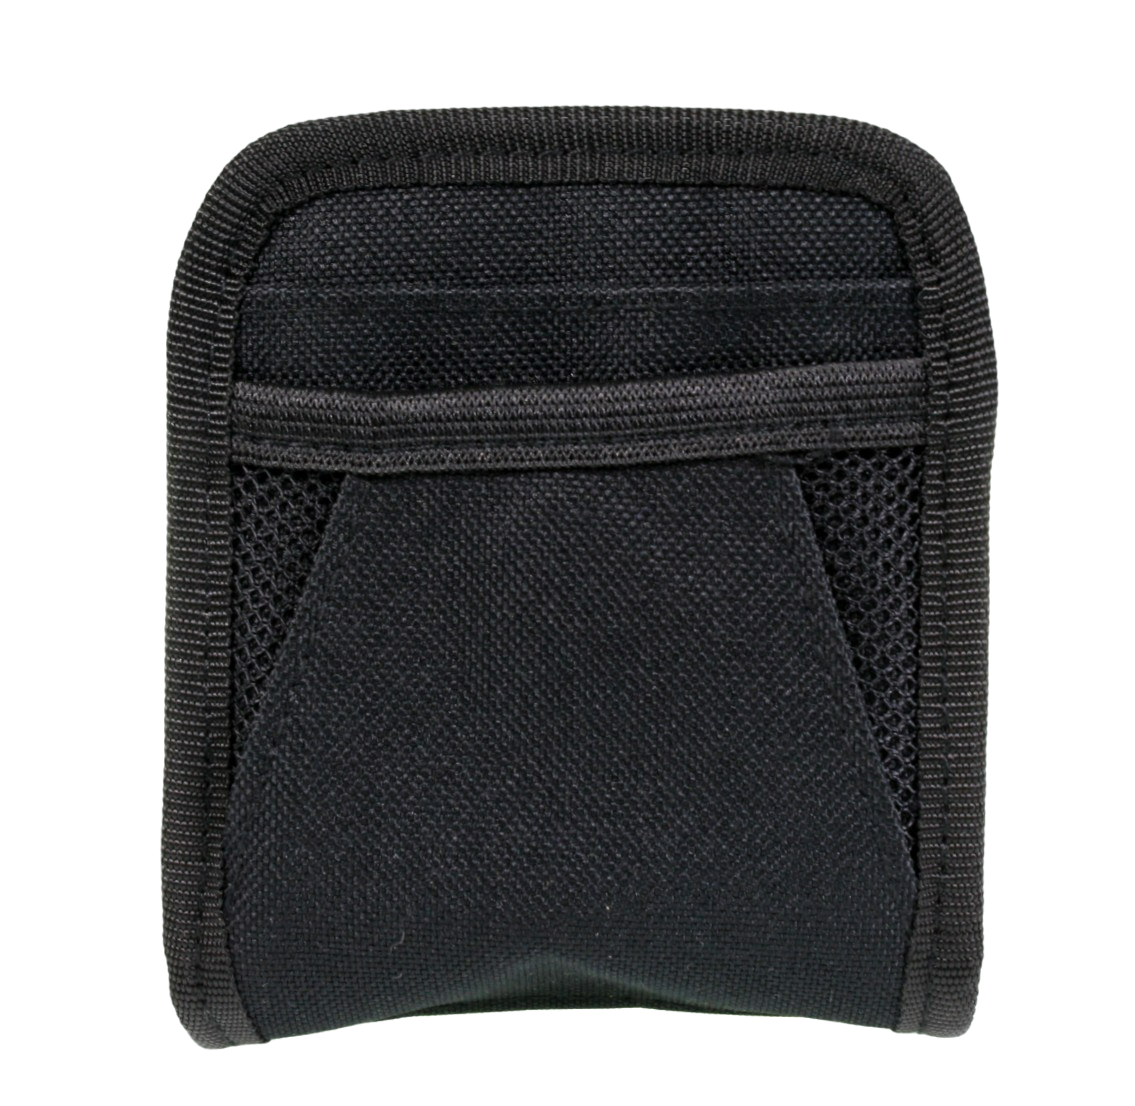 Front, top flap folded back